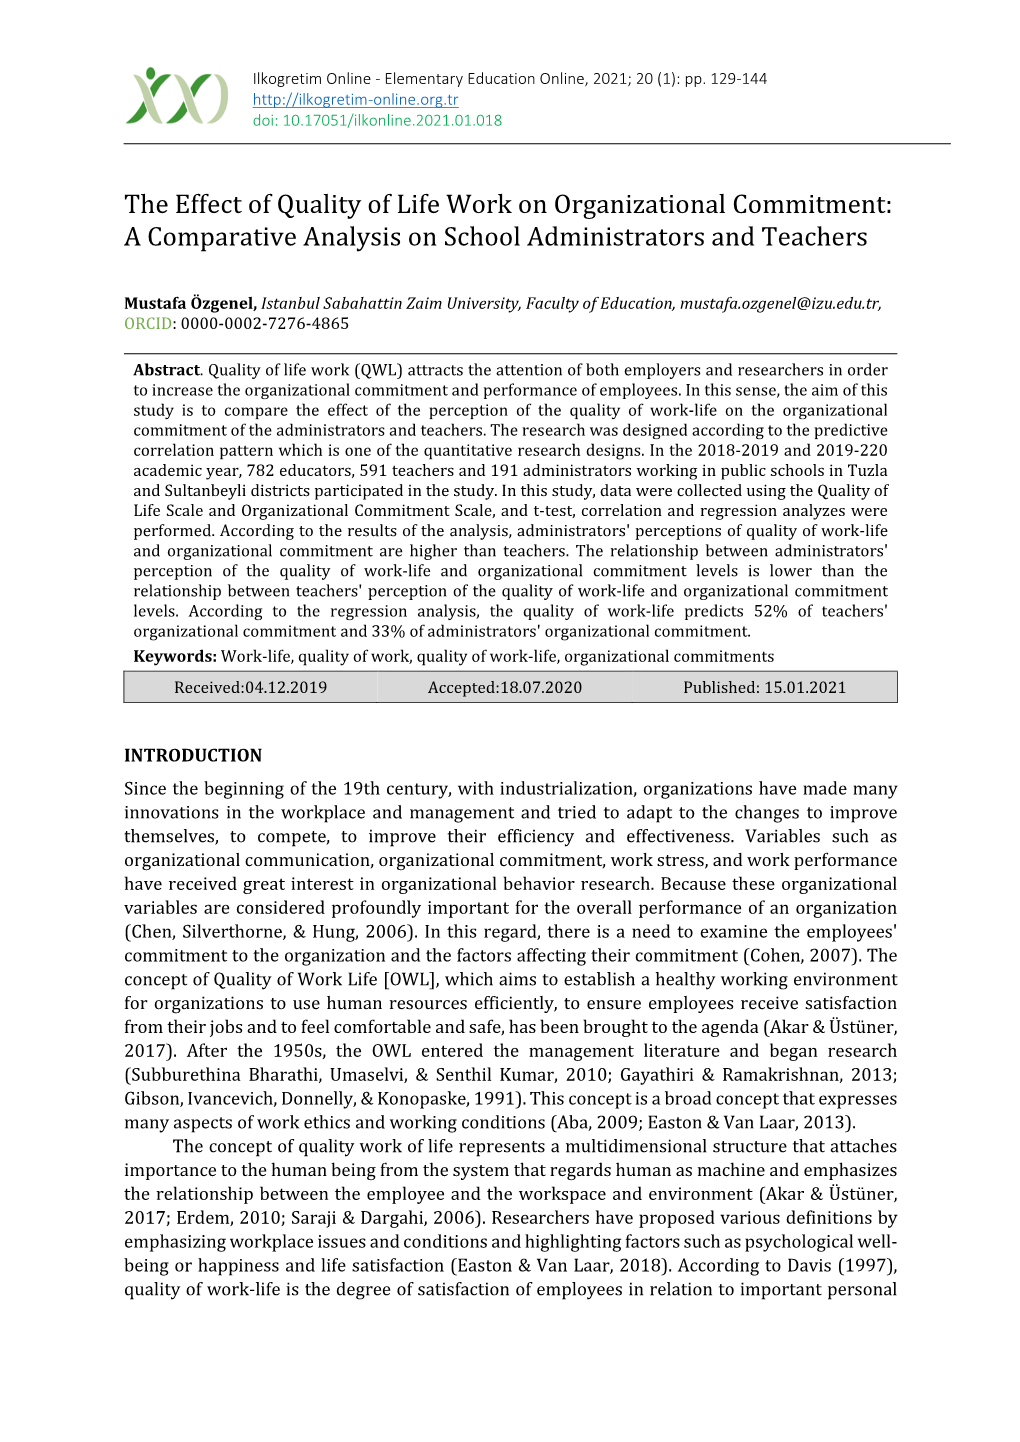 The Effect of Quality of Life Work on Organizational Commitment: a Comparative Analysis on School Administrators and Teachers